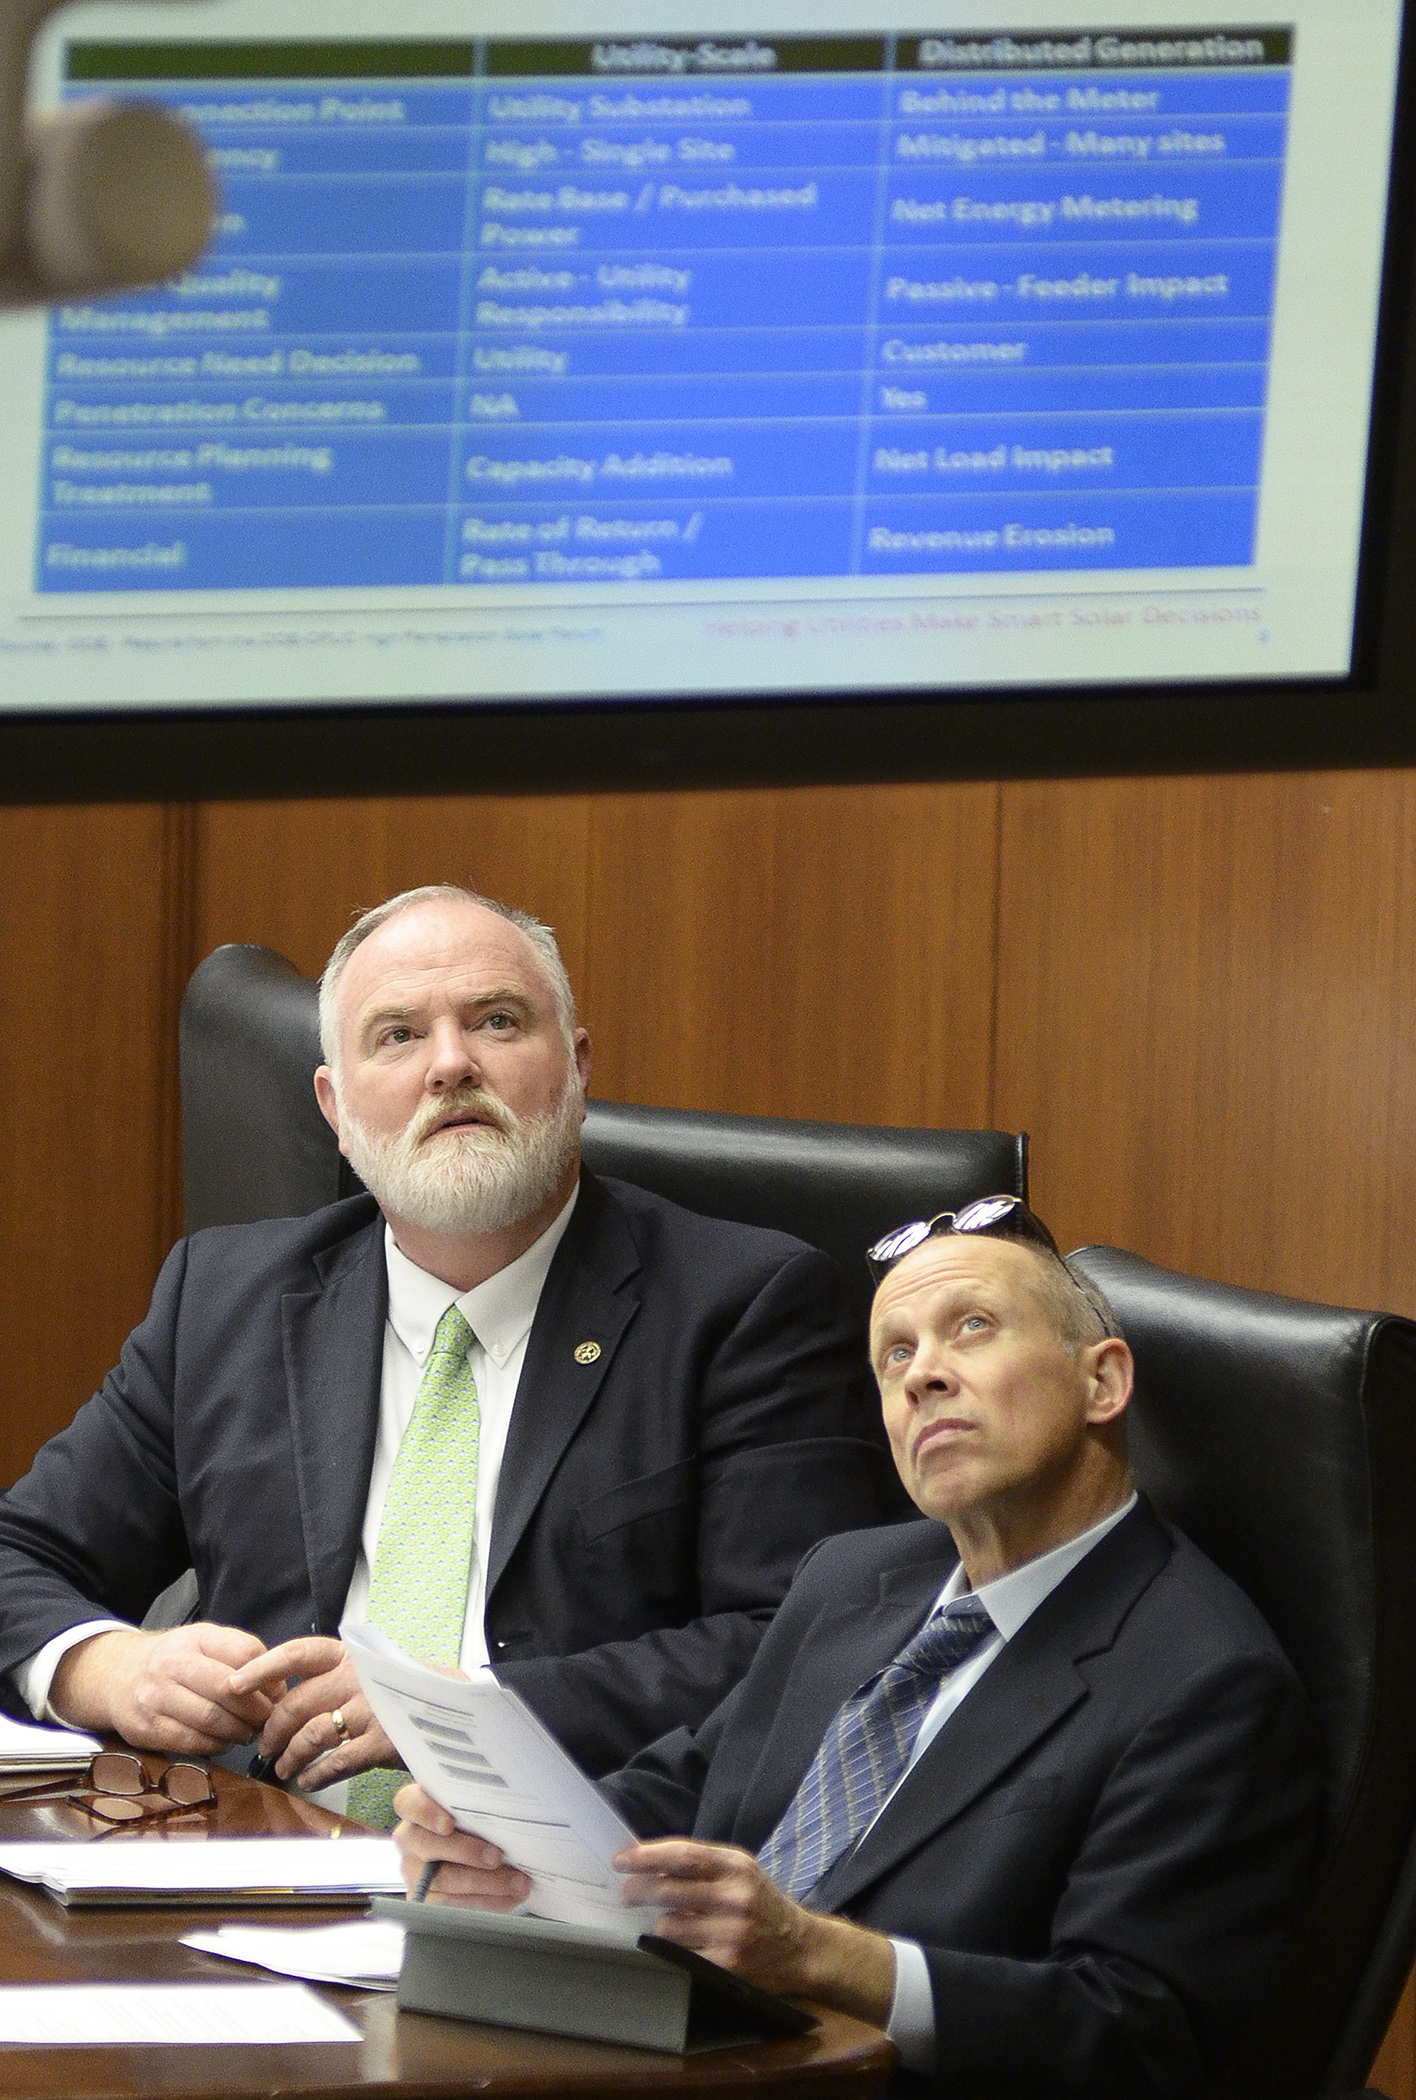 Rep. Bob Loonan, left, and Rep. Sheldon Johnson watch a presentation of net metering on a hearing room monitor during the Feb. 4 meeting of the House Job Growth and Energy Affordability Policy and Finance Committee.  Photo by Andrew VonBank